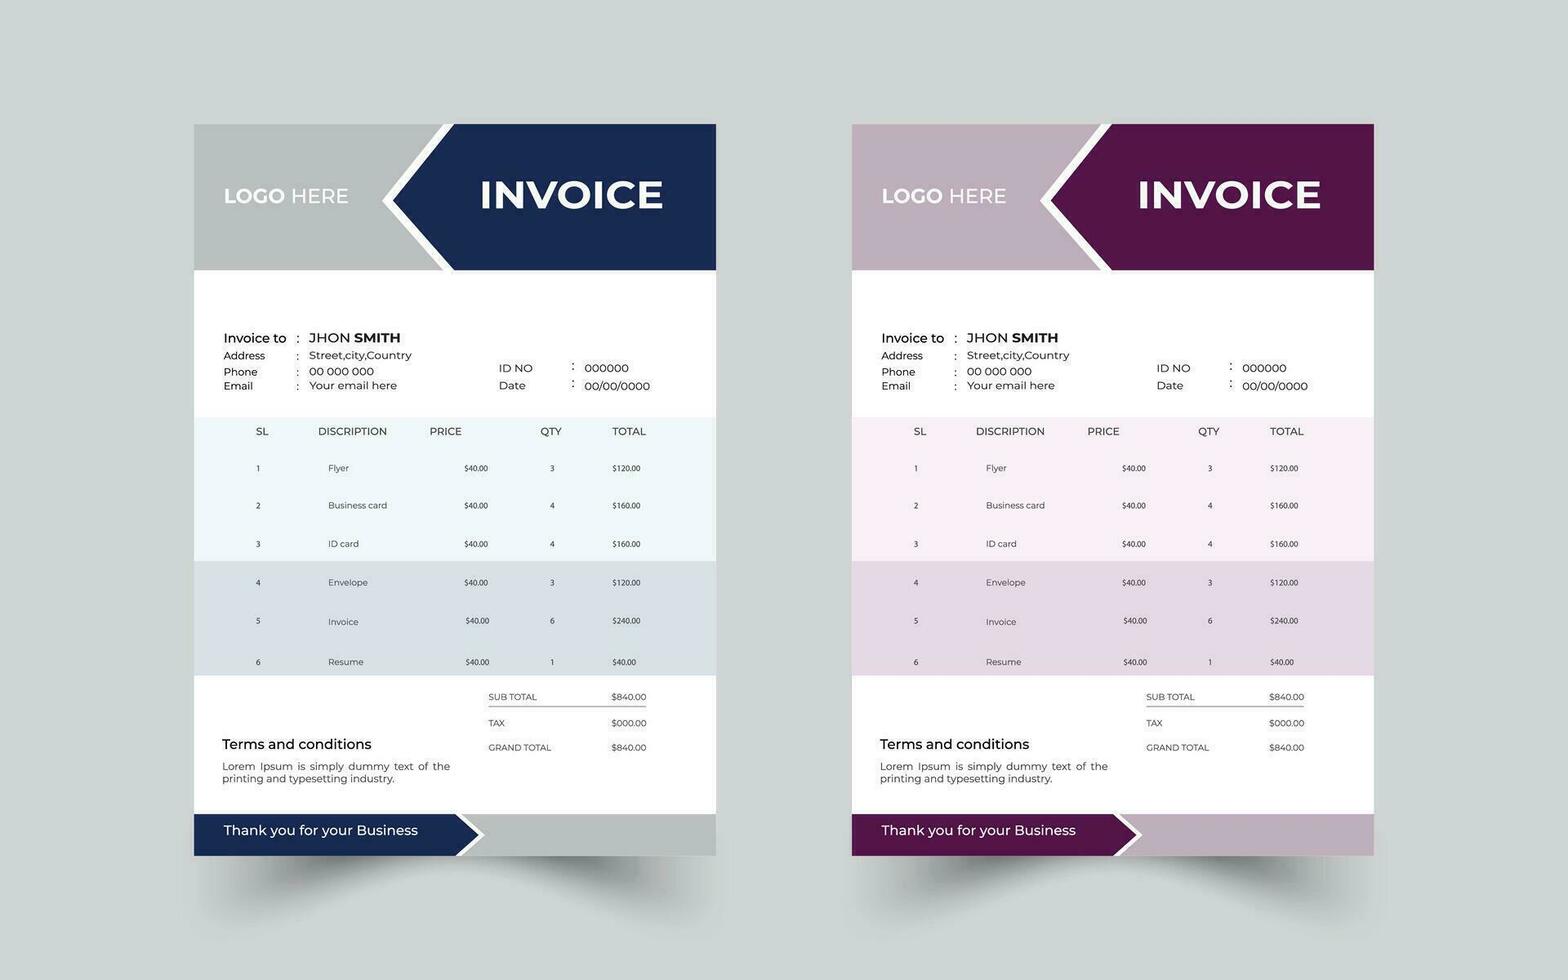 Invoice minimal design template,modern and professional minimal business invoice template vector